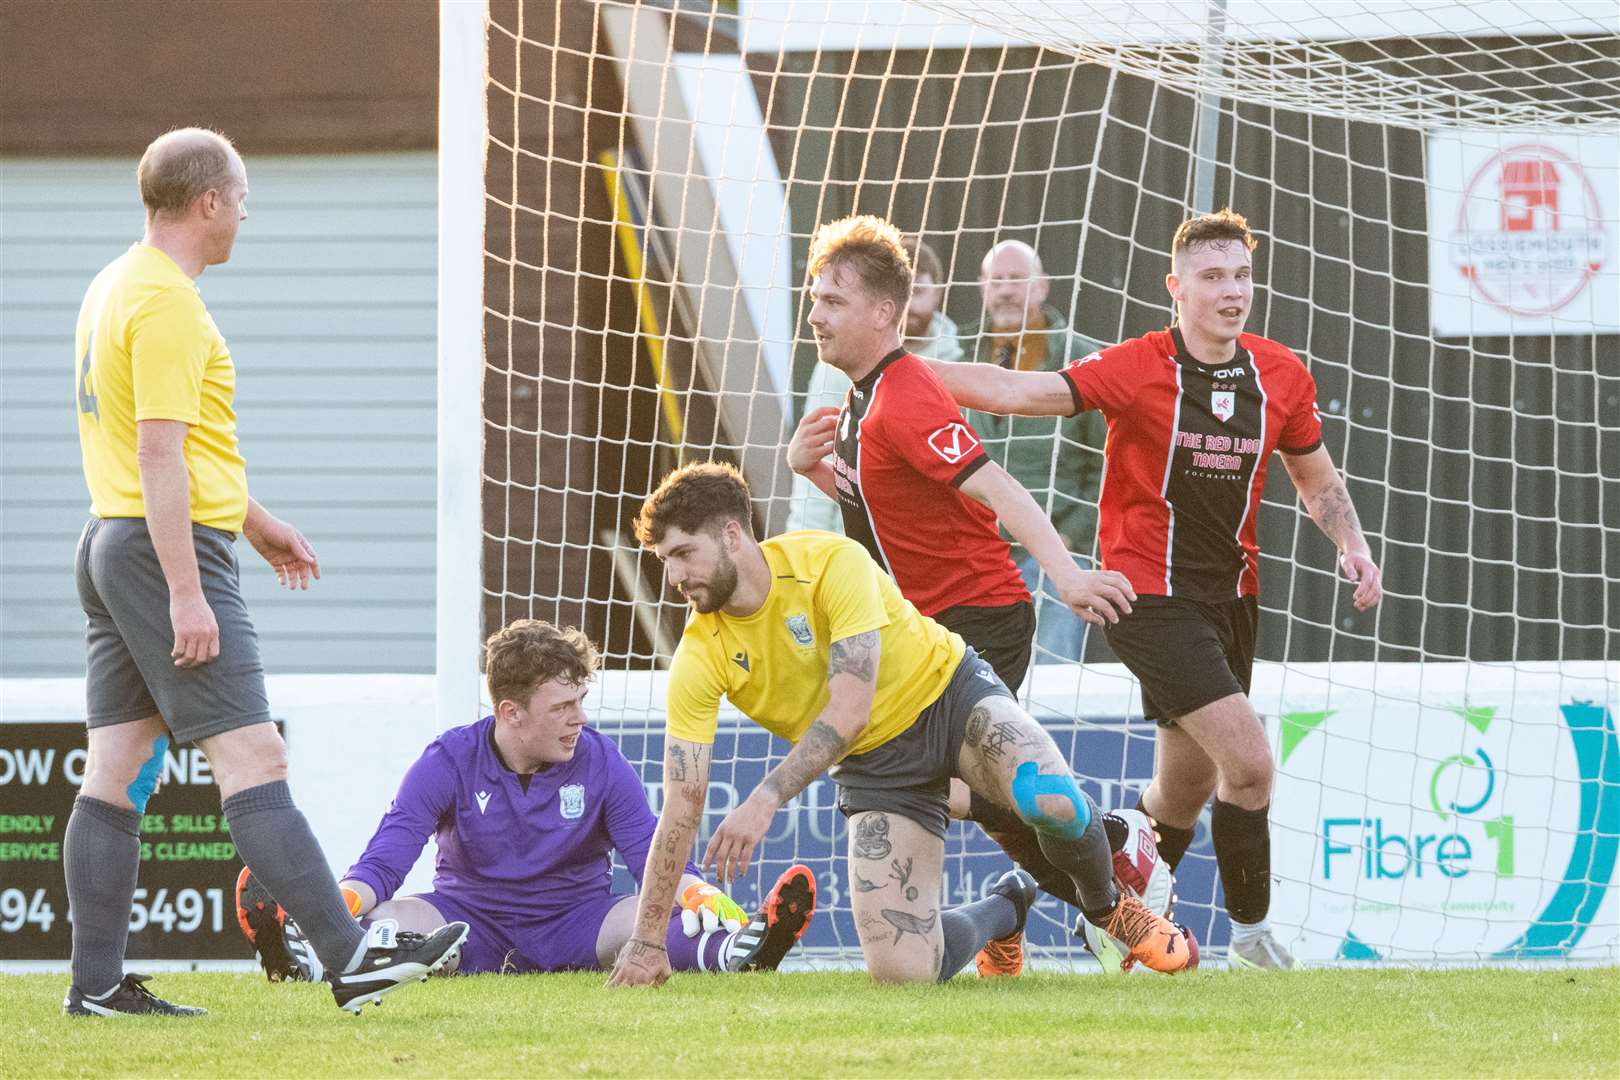 Fochabers forward Warren Orford (centre) opens the scoring. ..Fochabers FC (7) vs Hopeman FC (2) - Mike Simpson Cup Final 2023 - Grant Park, Lossiemouth...Picture: Daniel Forsyth..